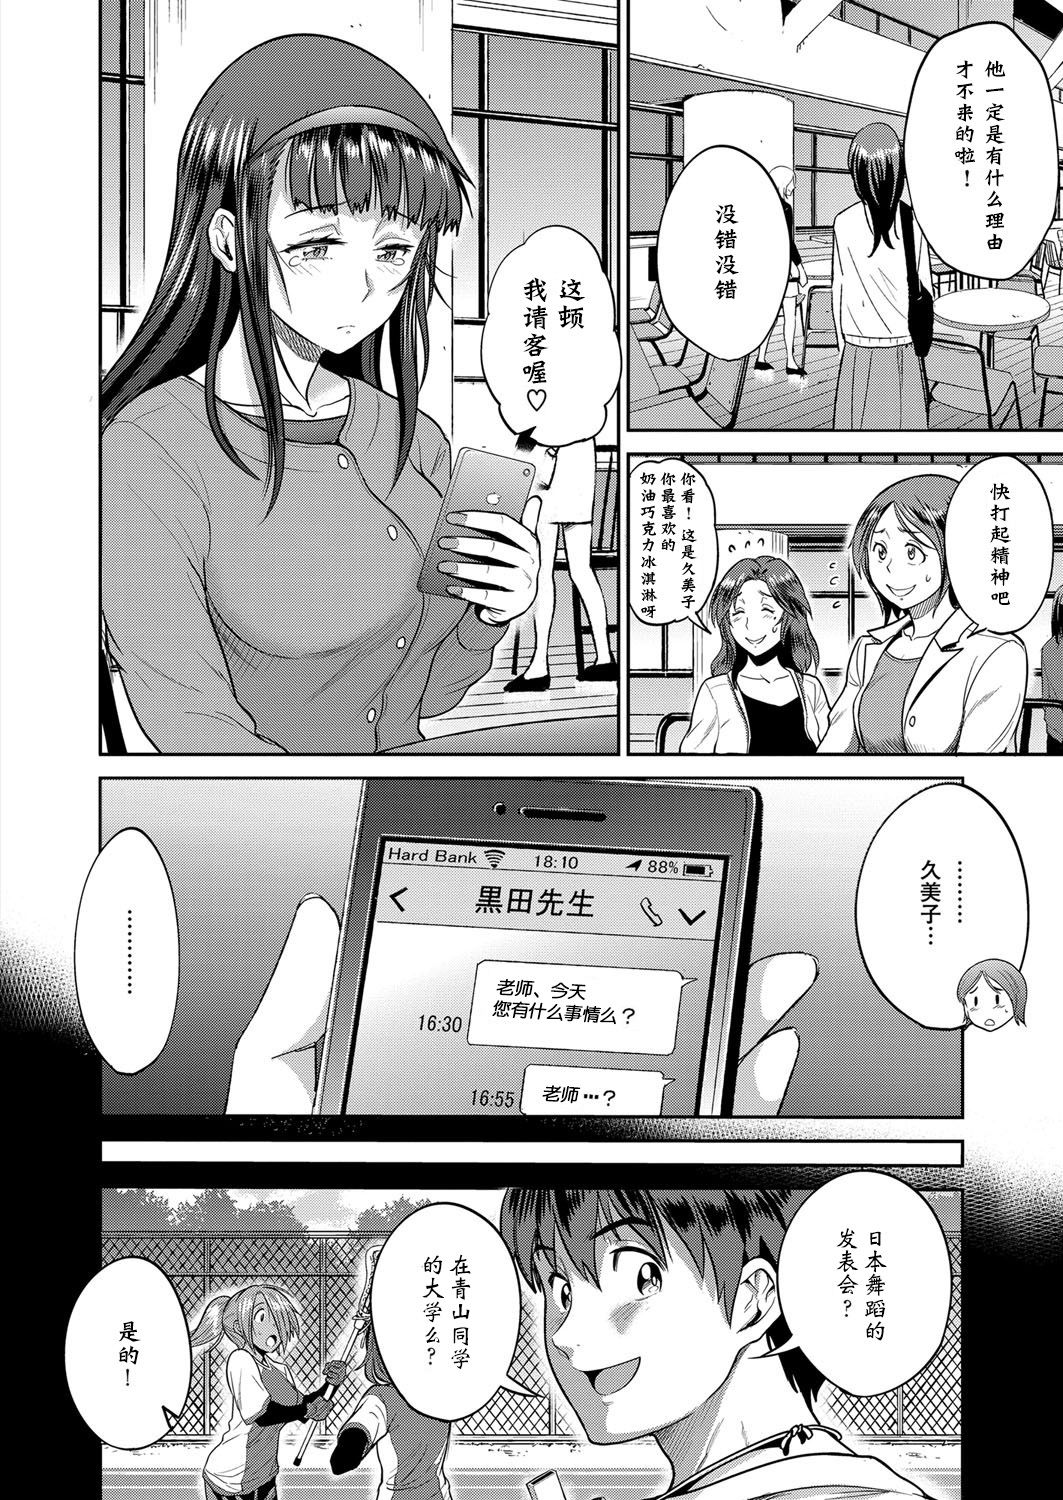 [DISTANCE] Joshi Lacu! ~2 Years Later~ Ch. 4.5 (COMIC ExE 07) [Chinese] [鬼畜王汉化组] [Digital] [DISTANCE] じょしラク！～2Years Later～ 第4.5話 (コミック エグゼ 07) [中国翻訳] [DL版]